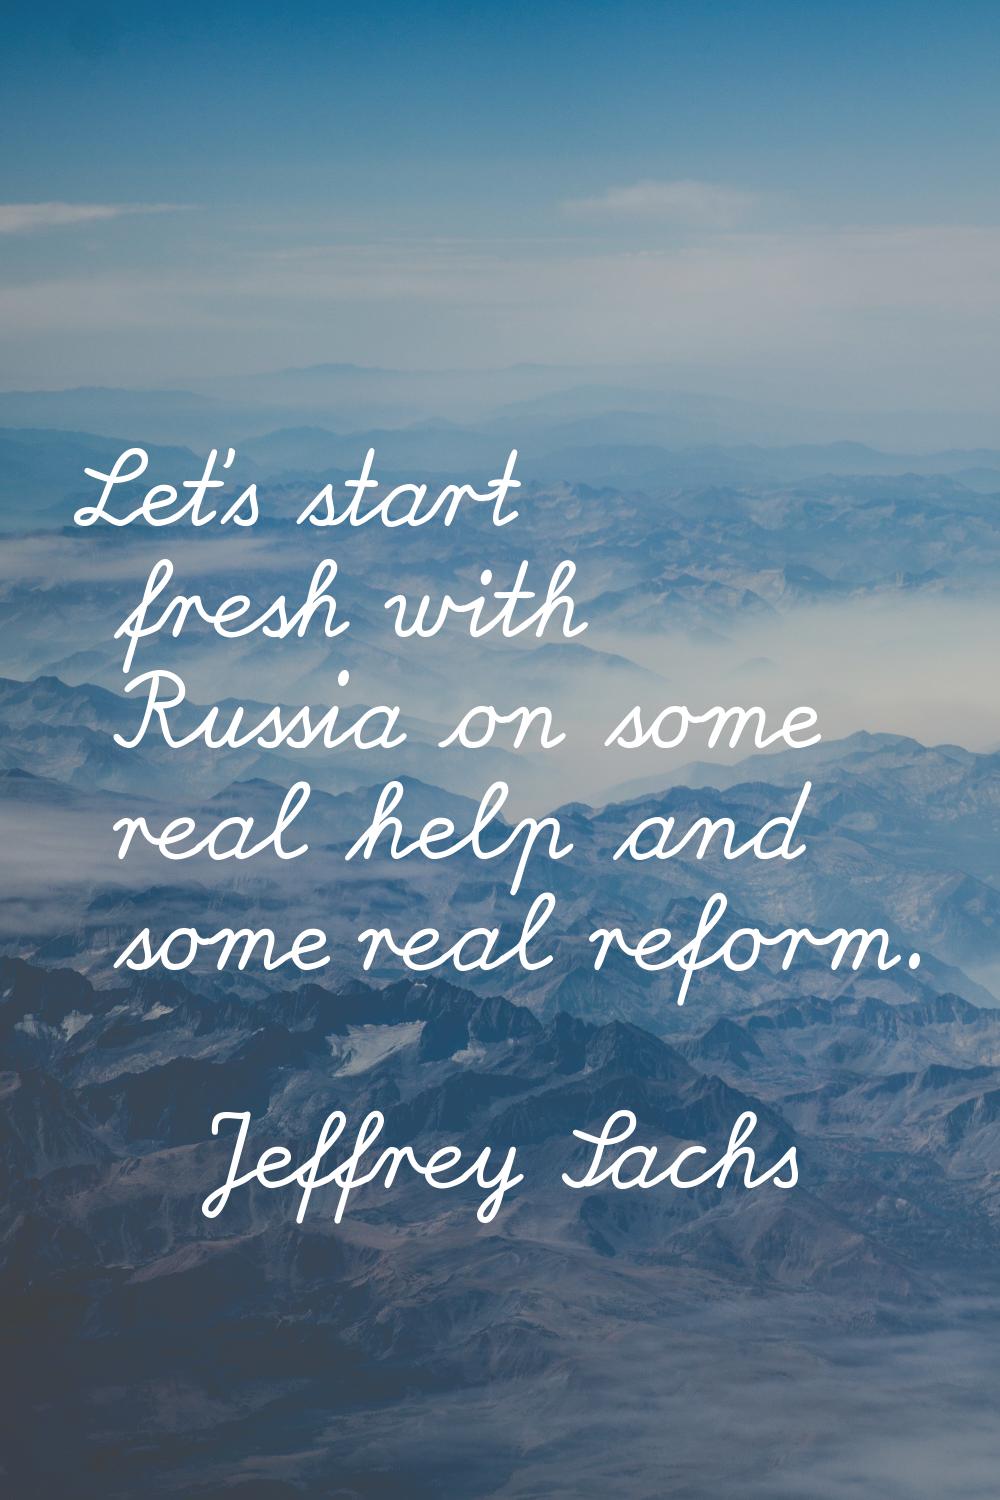 Let's start fresh with Russia on some real help and some real reform.